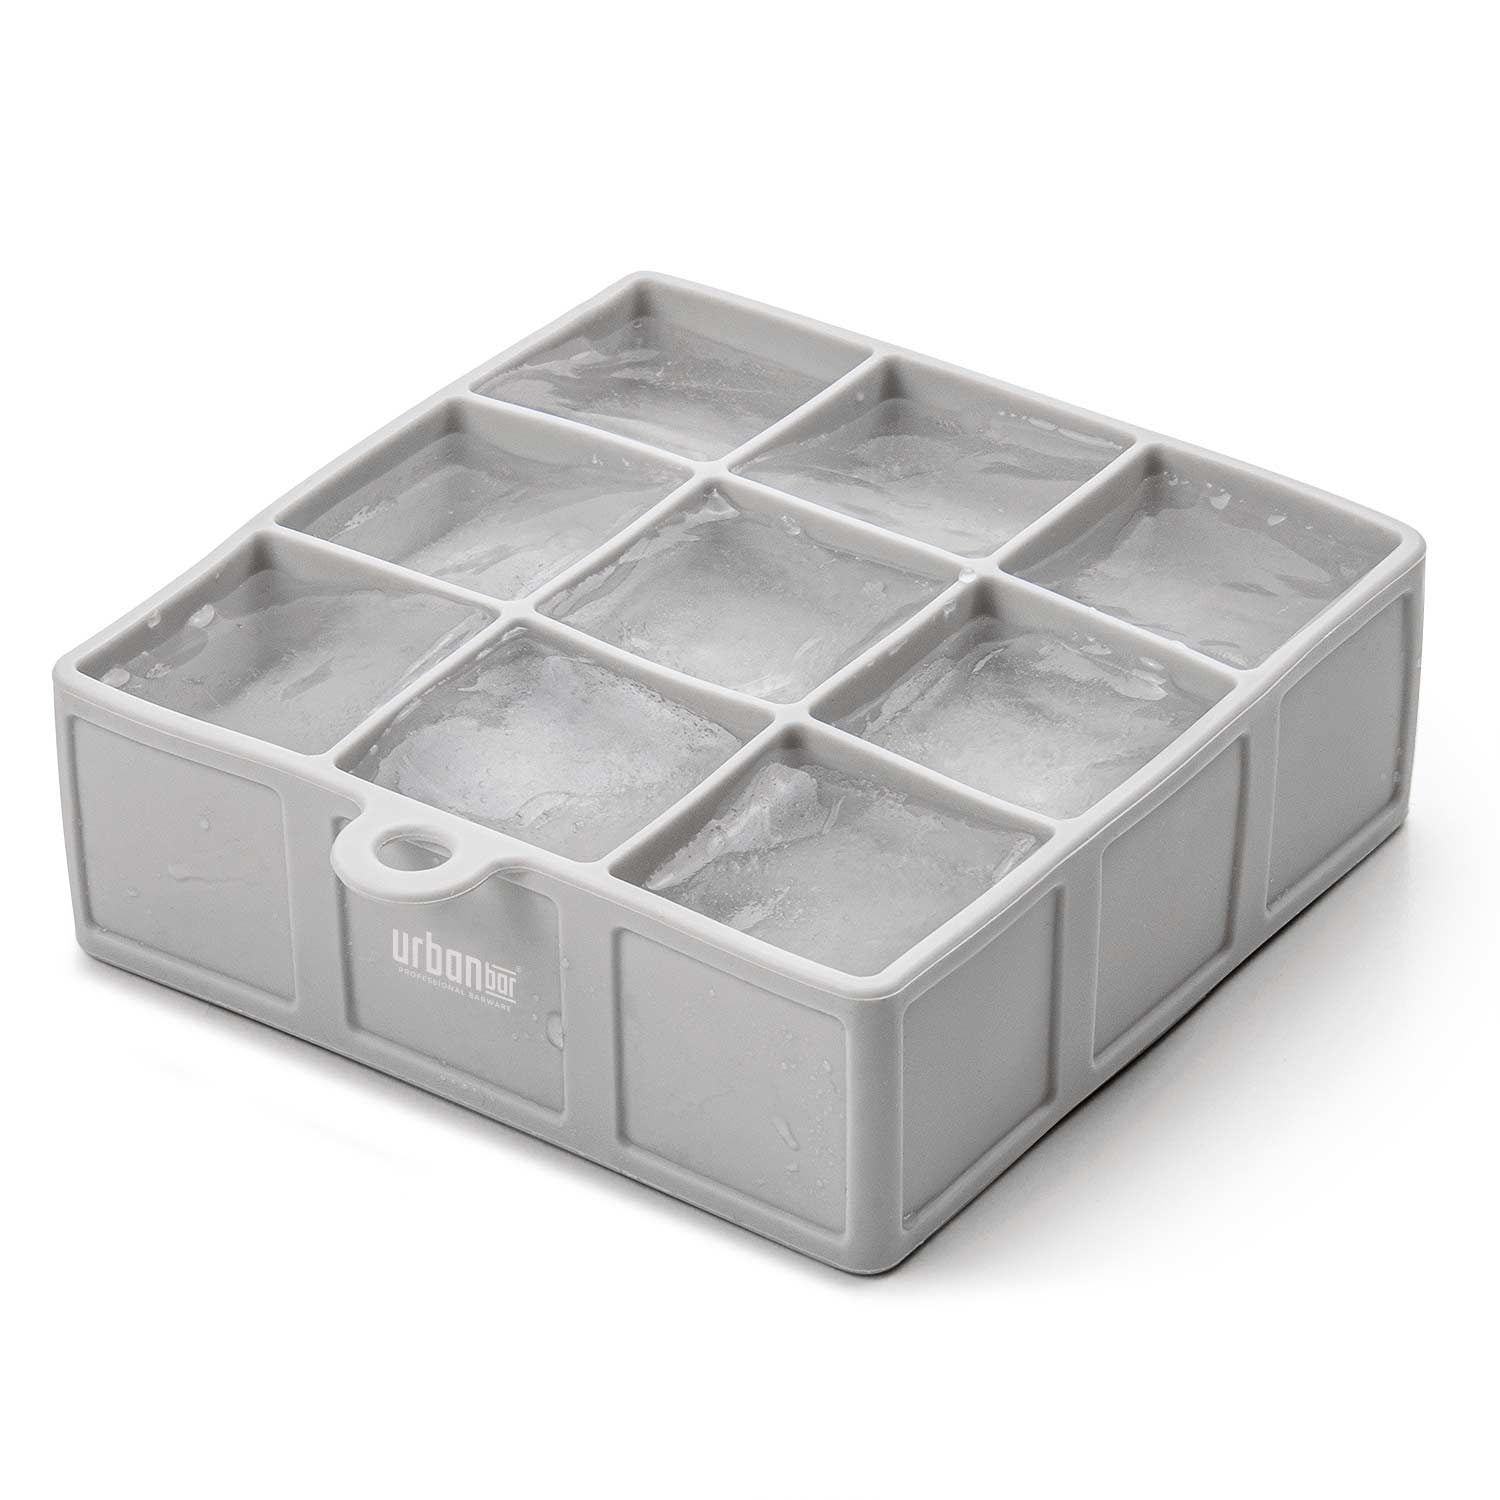 Silicone Ice Cube Tray - 9 Cube